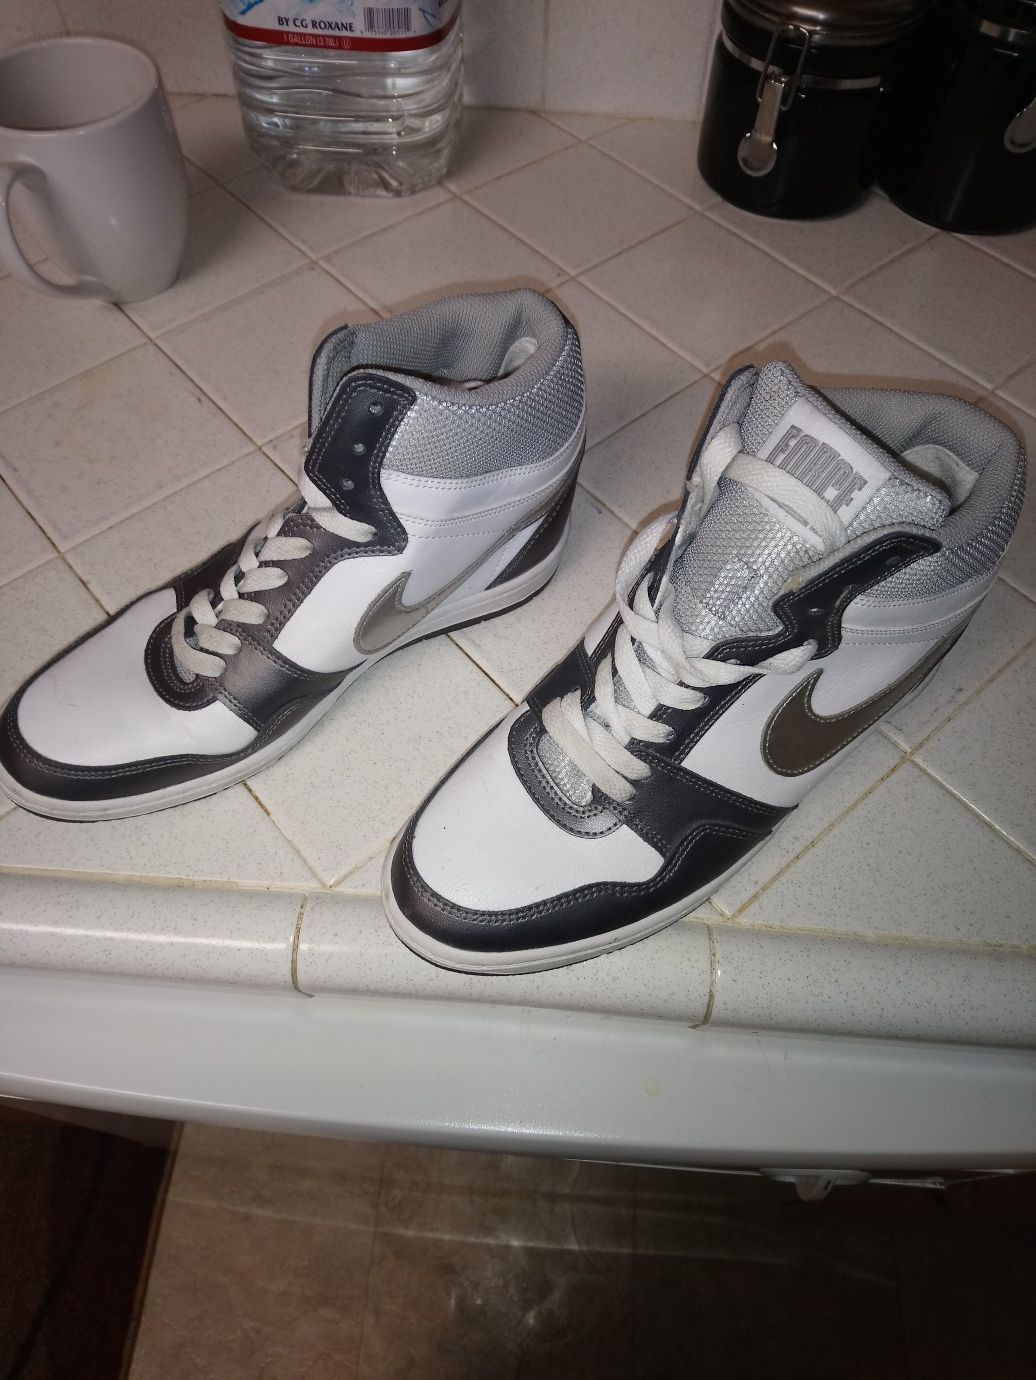 Nike size 8 narrow they say 9 1/2 but there not